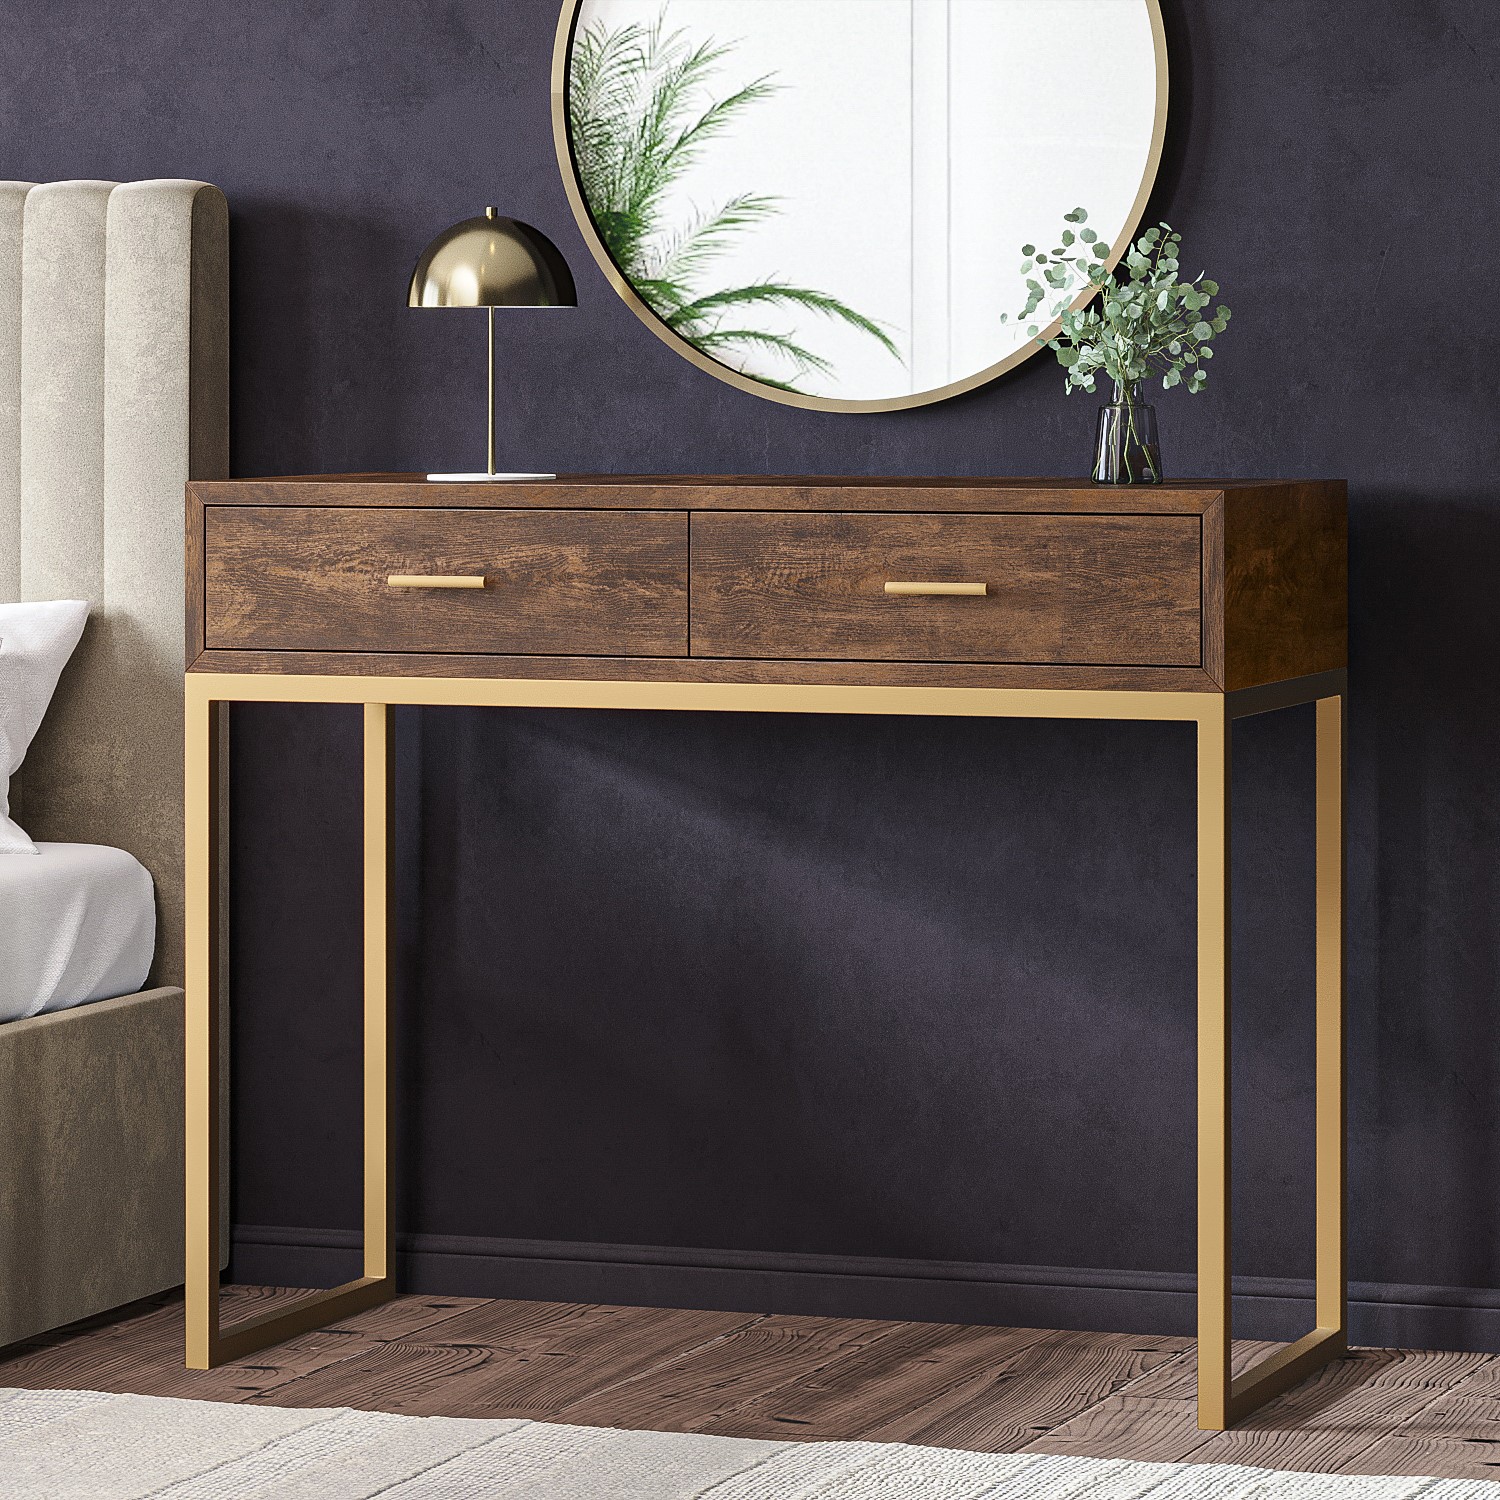 Photo of Walnut dressing table with 2 drawers - aubrey